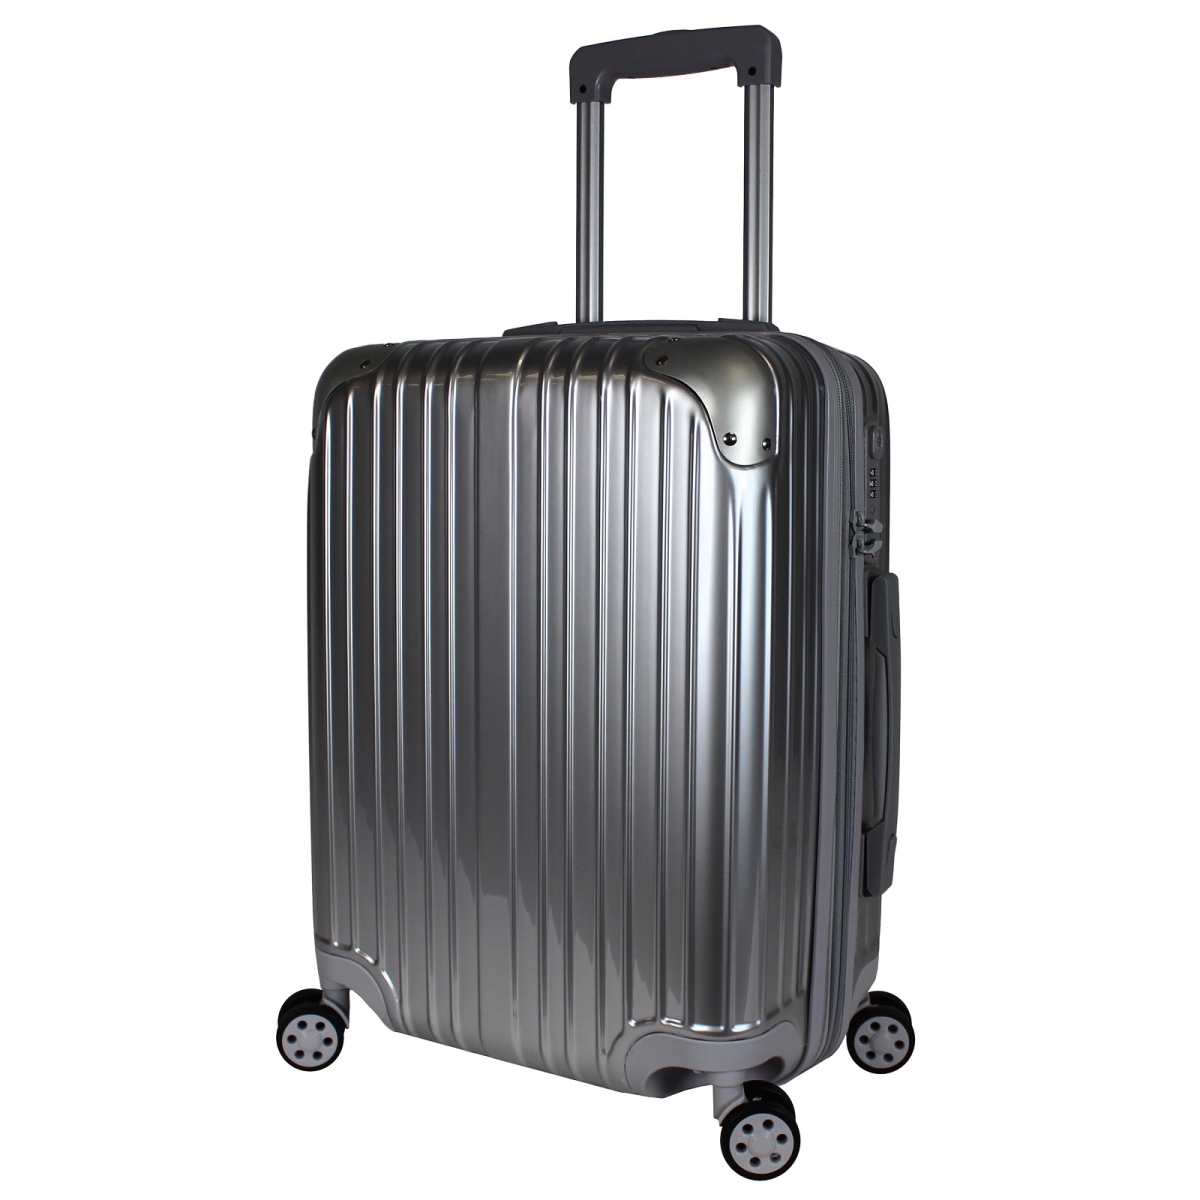 Wt046-silver 20 In. Cruise Hardside Spinner Carry On Upright Luggage, Silver